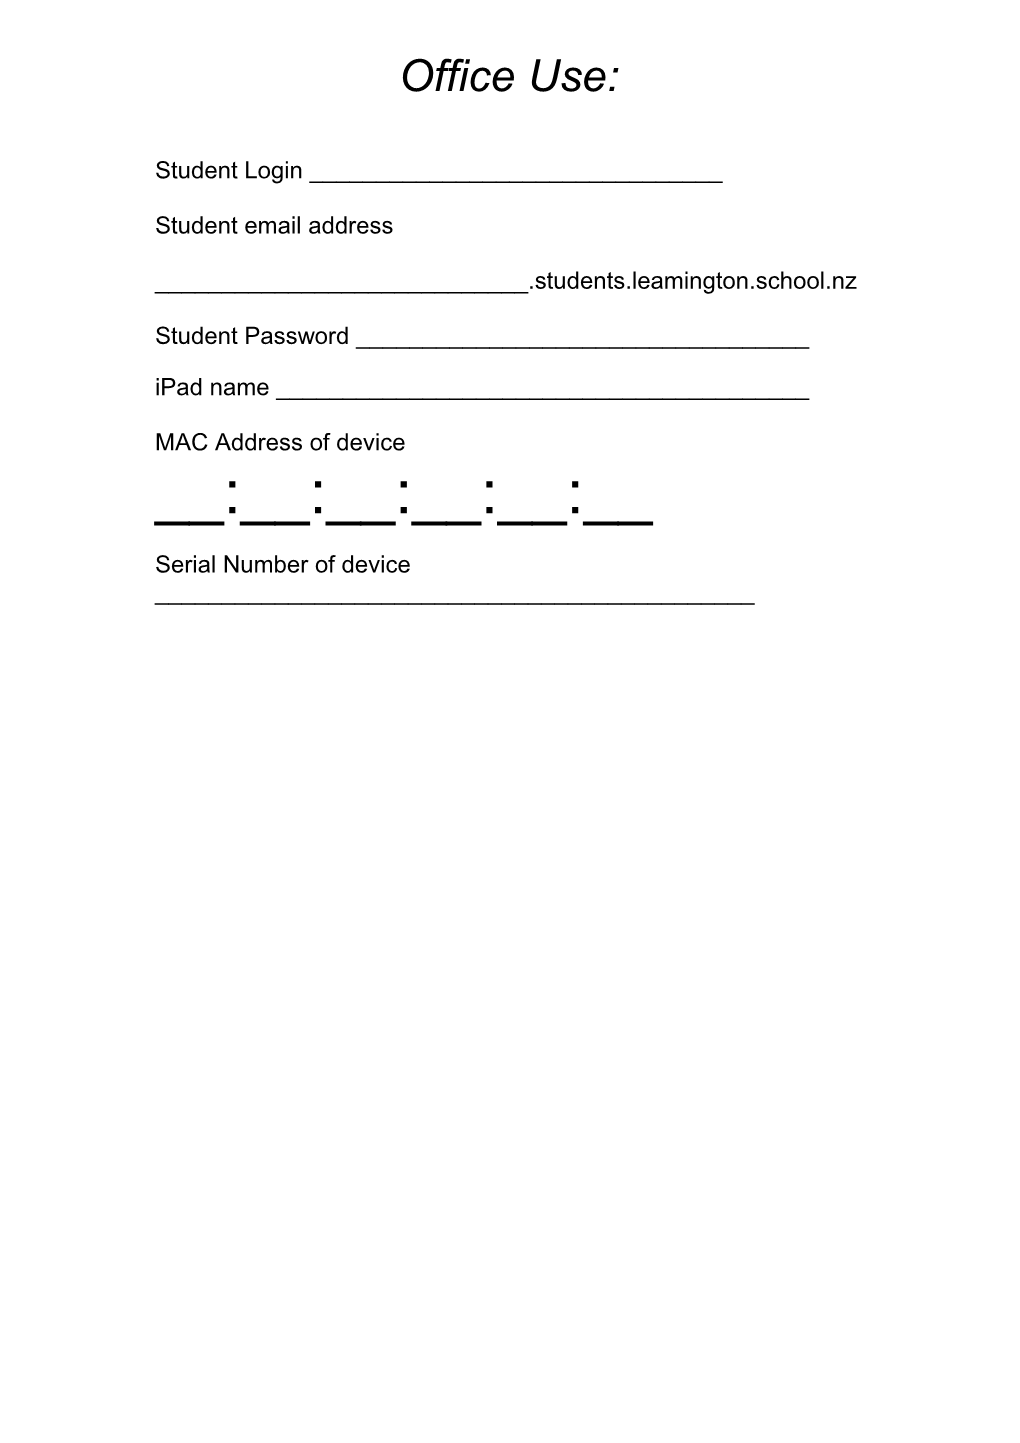 BYOD Agreement Form and Protocol for the Use of Ipad S at Leamington School